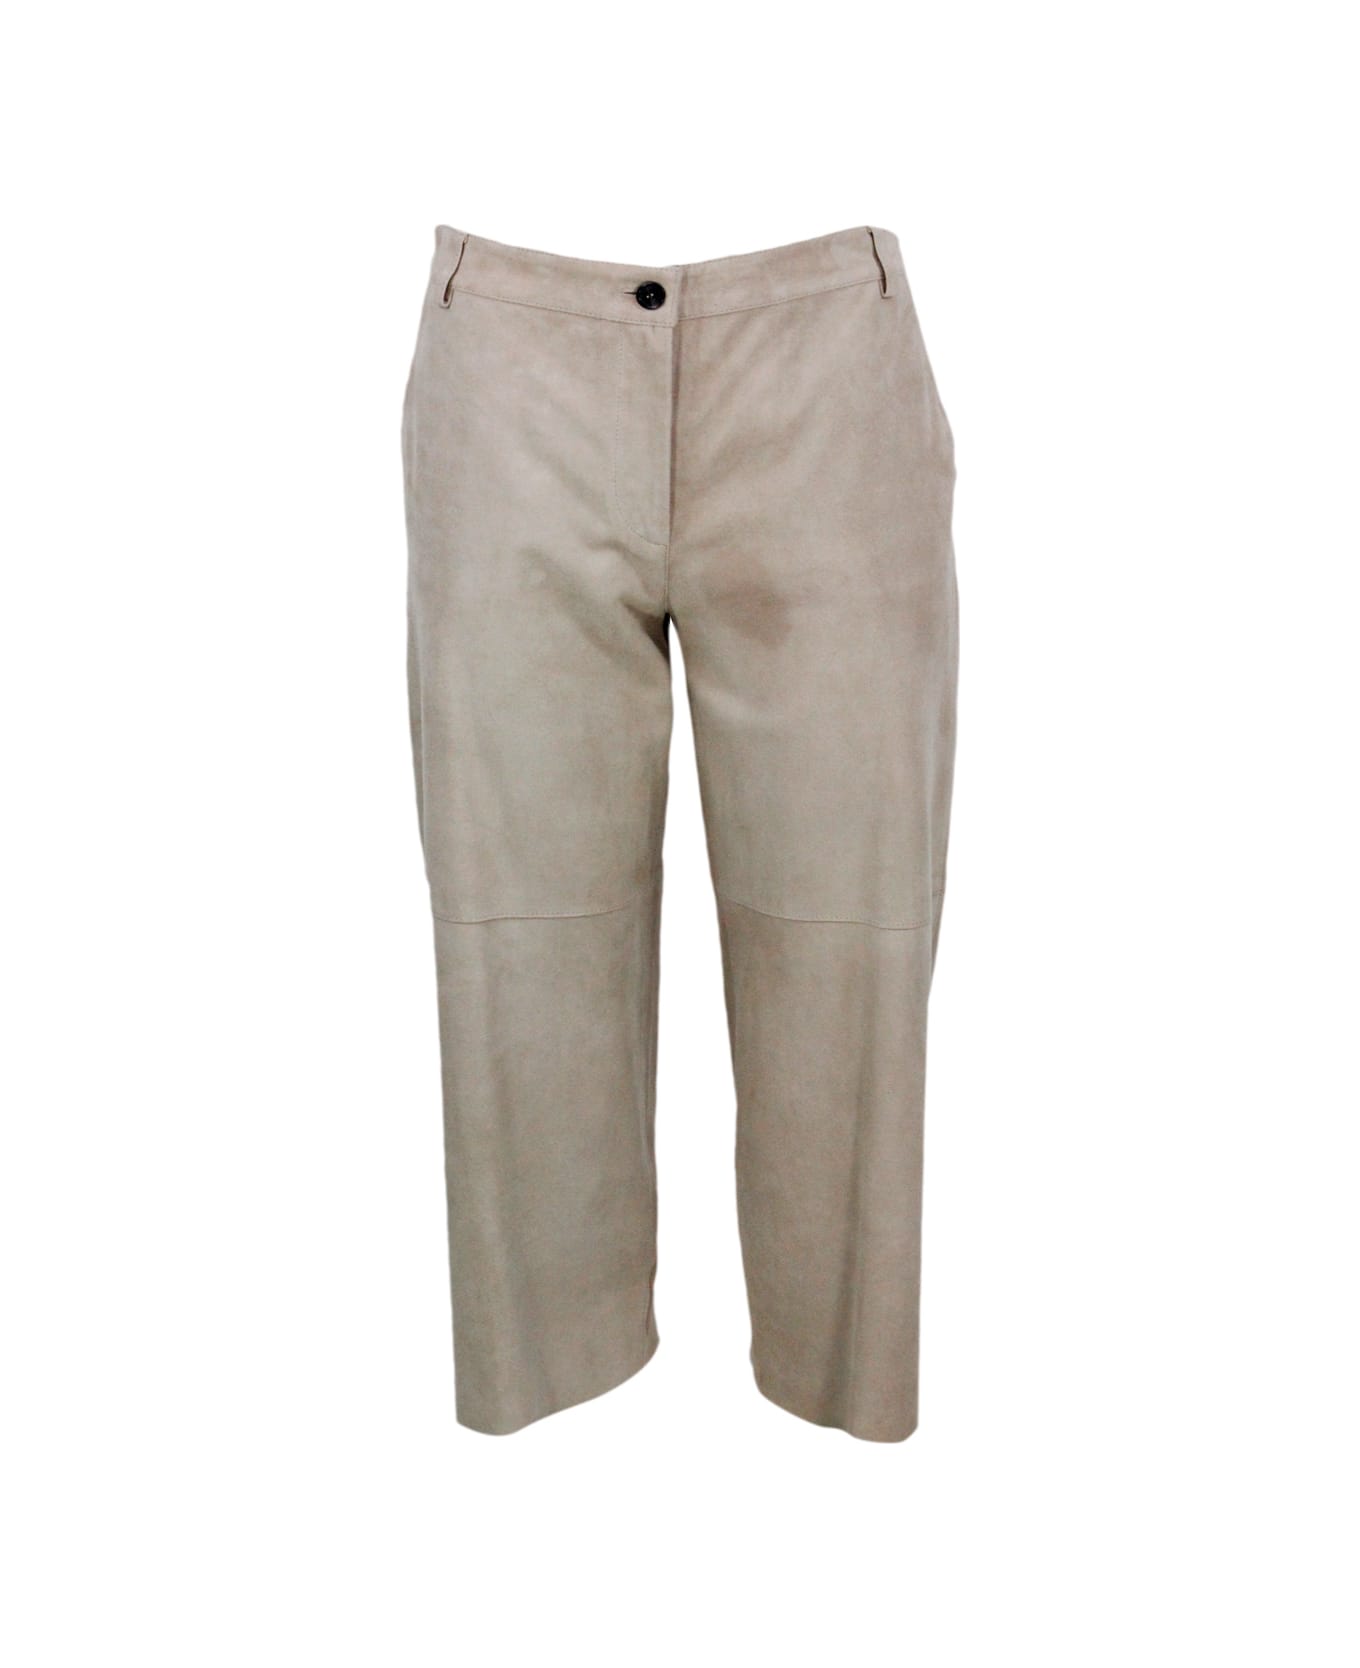 Antonelli Trousers Made Of Soft Suede, With A Soft Fit And Zip And Button Closure With Elastic Waist On The Back. Welt Pockets. - Beige ボトムス